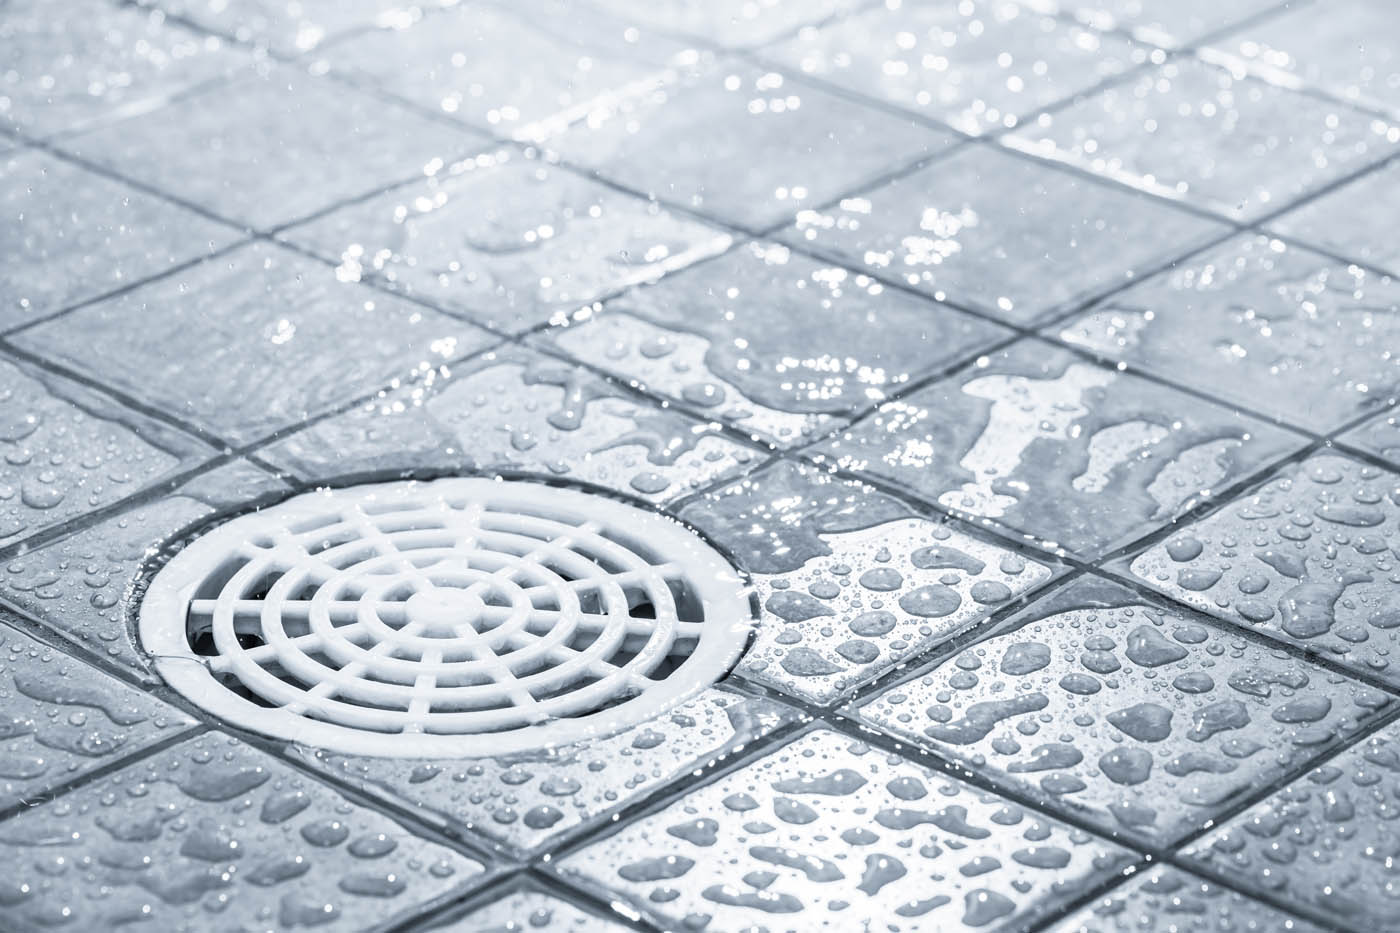 WyattWorks drain cleaning in Mooresville / Huntersville, NC, prevent your bathroom floor from flooding.